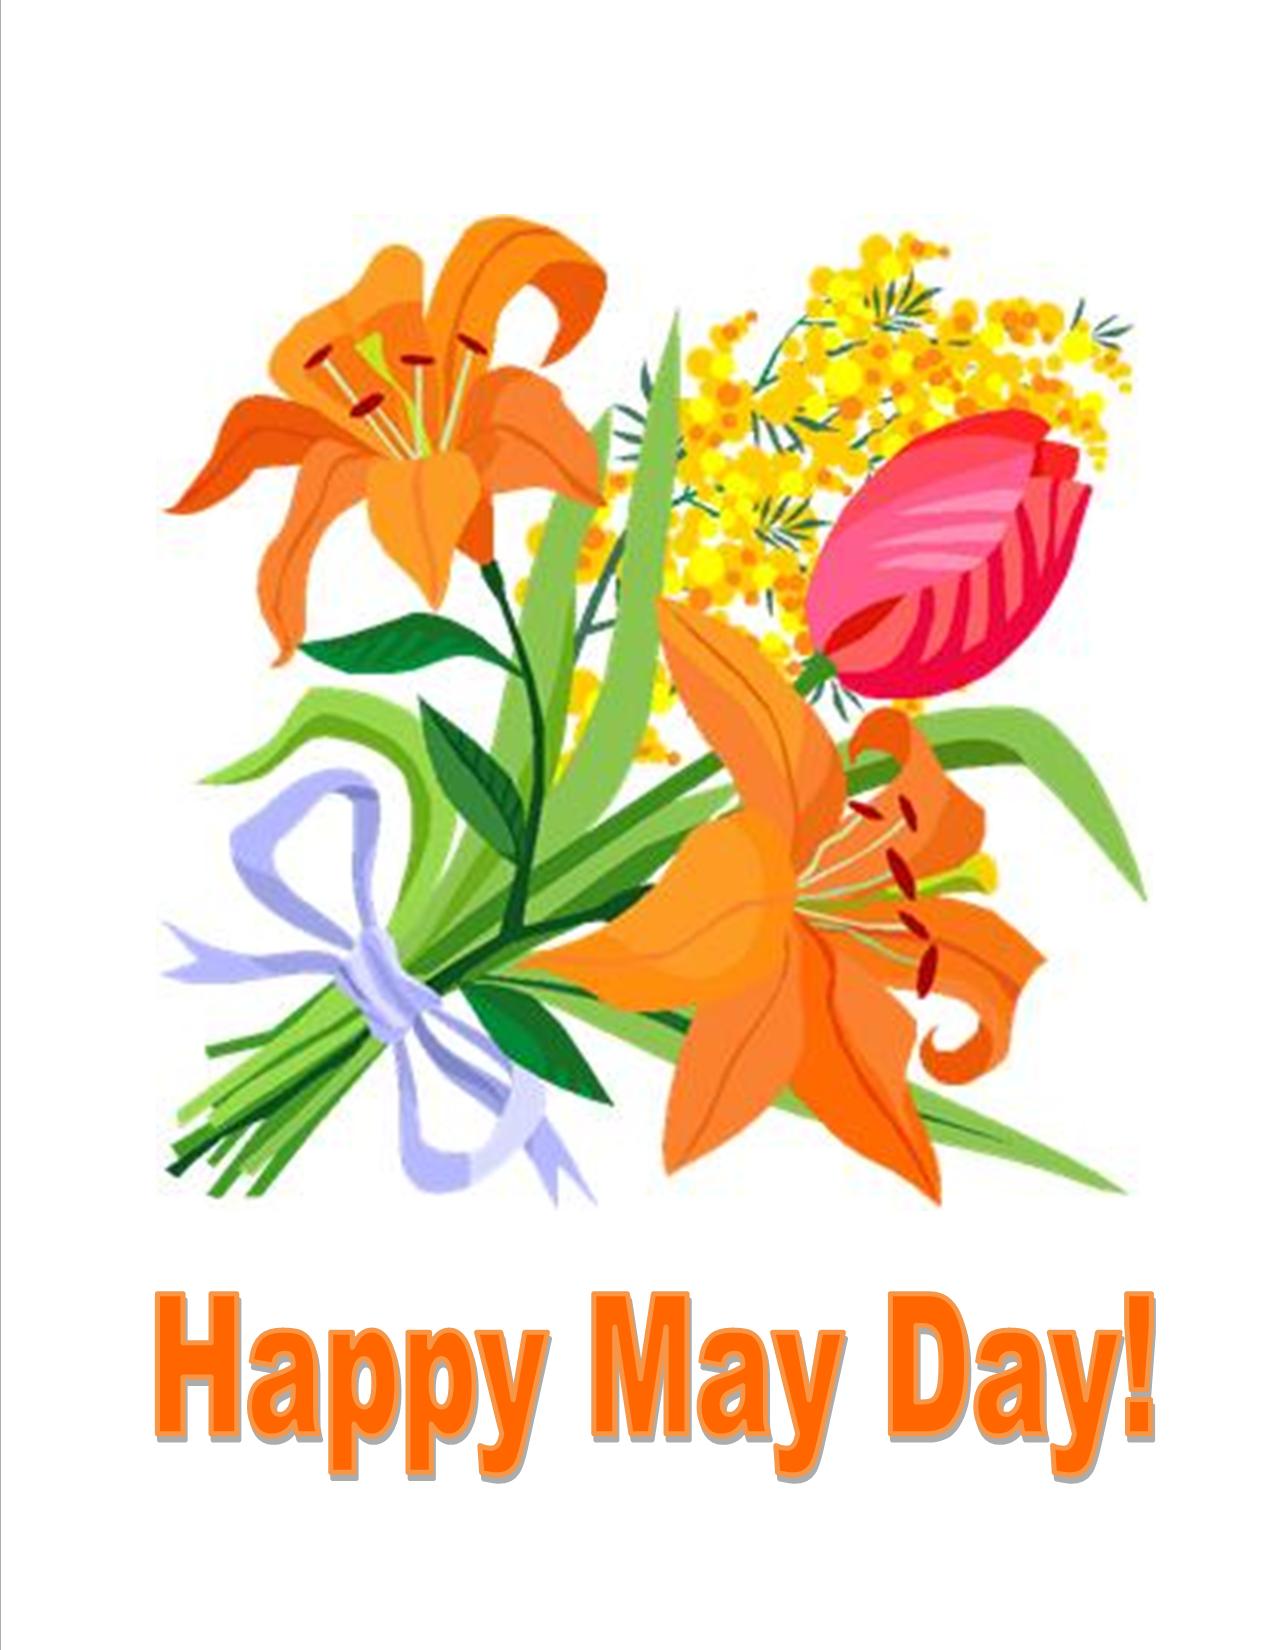 50+ Most Beautiful May Day Wish Pictures And Photos